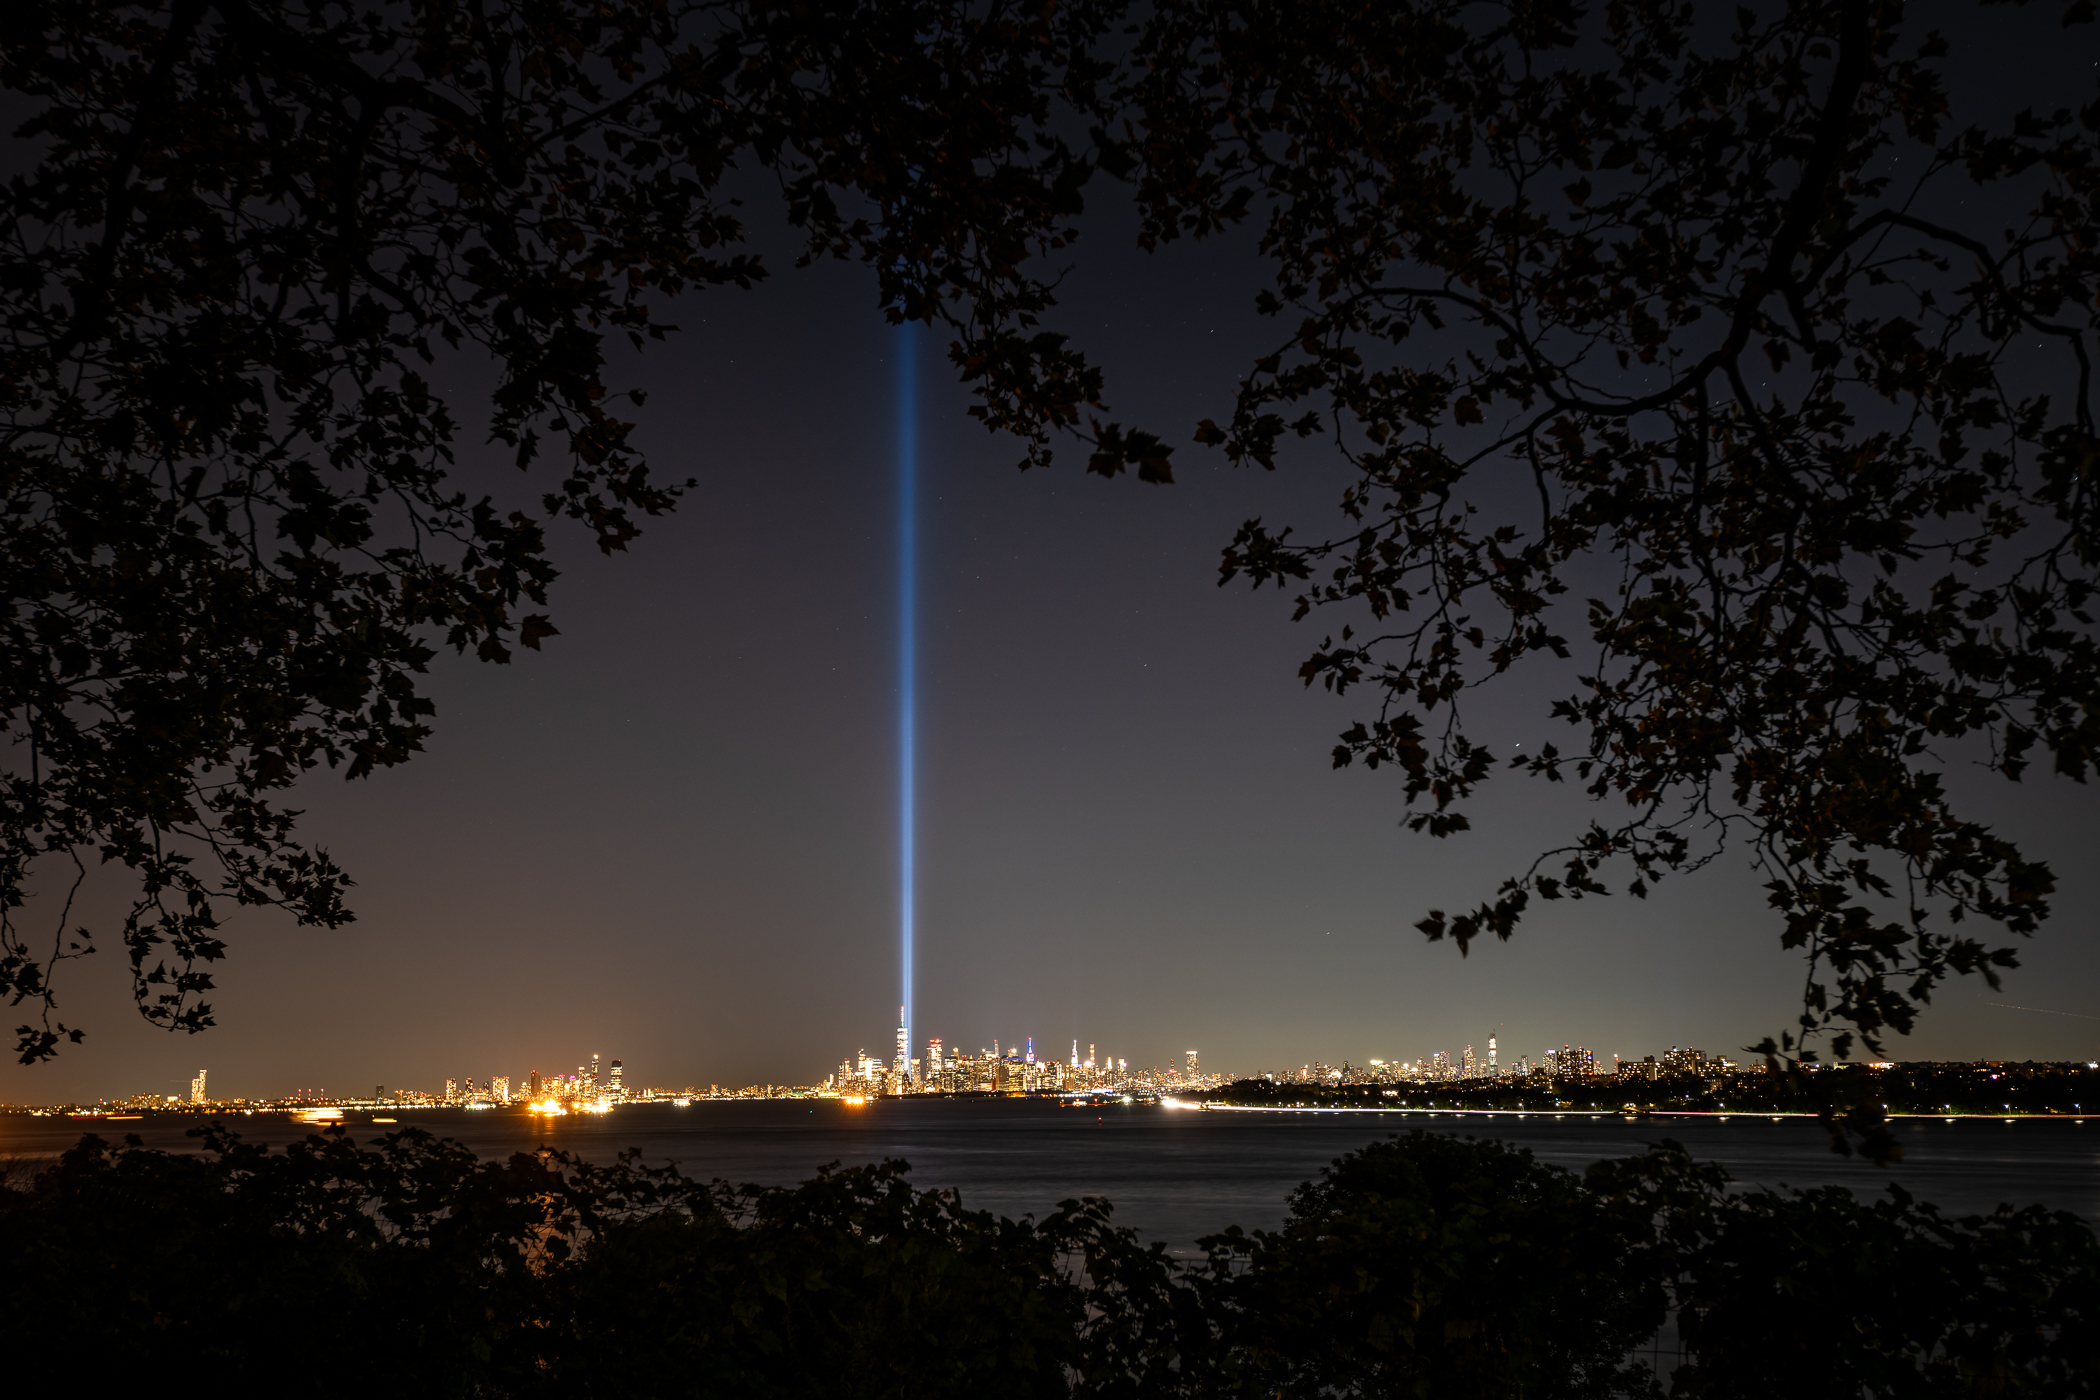 9/11 Tribute in Light, NYC